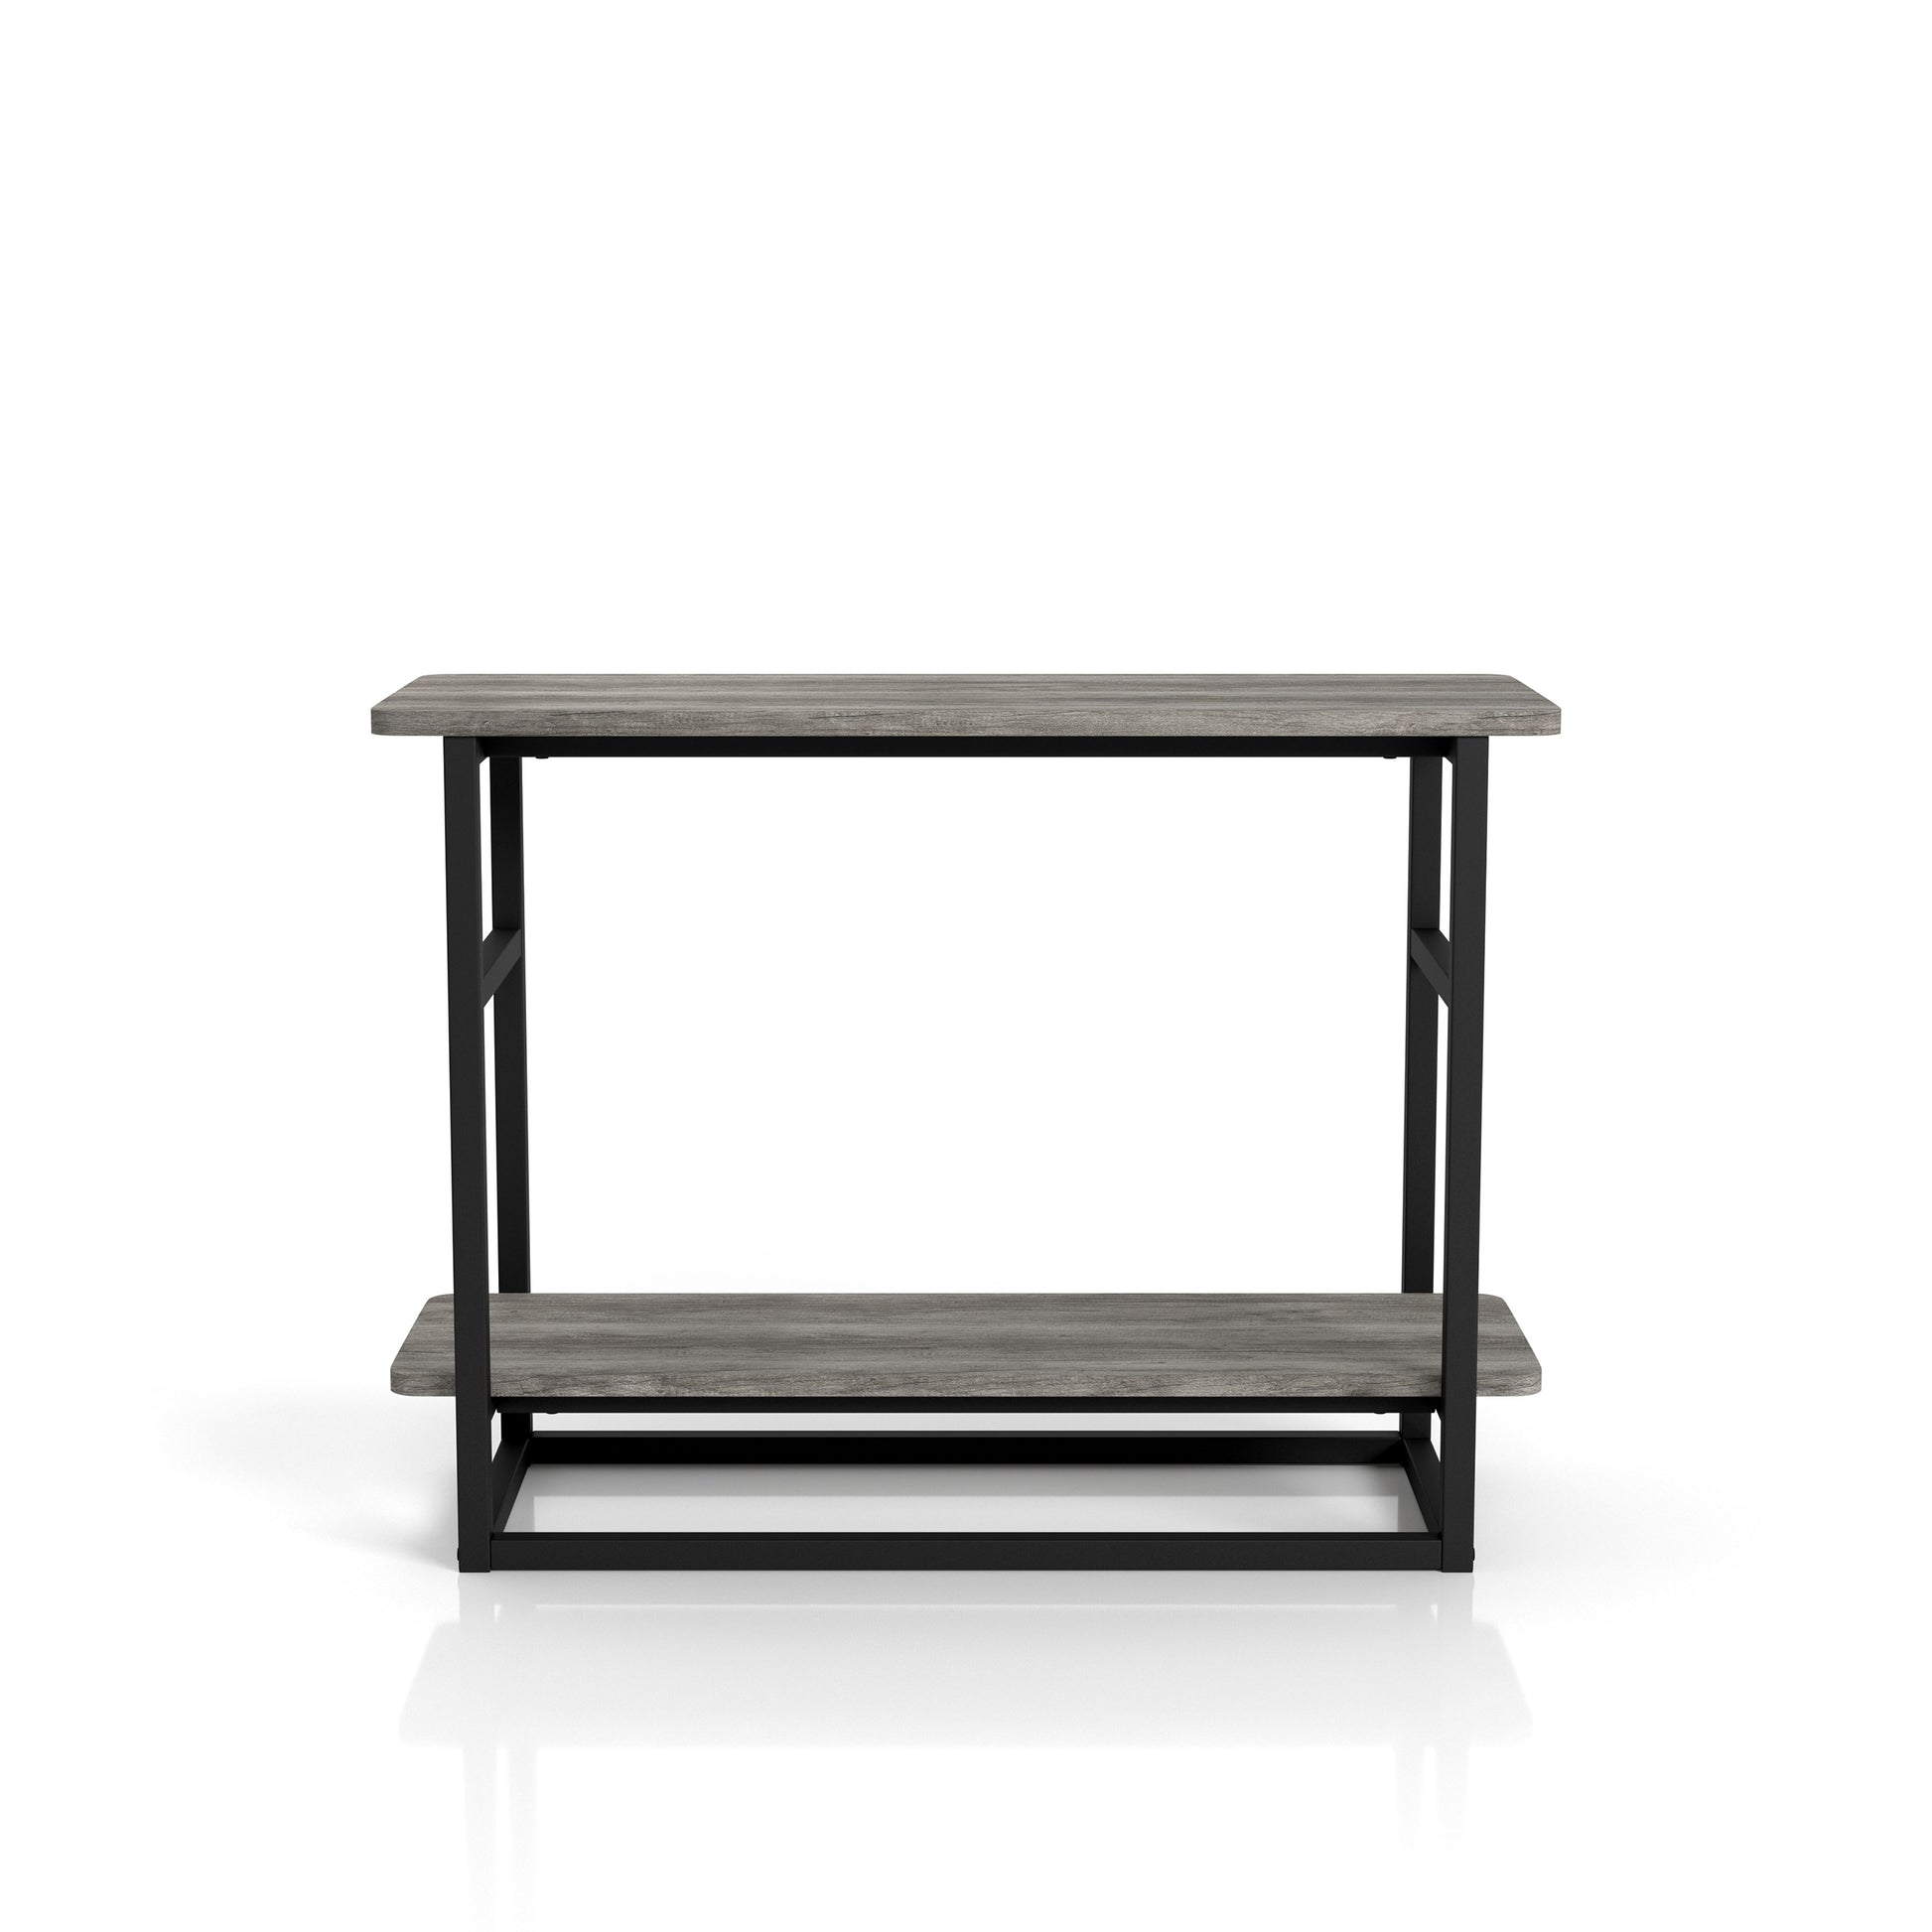 Front-facing side view of a industrial vintage gray oak one-shelf long side table on a white background